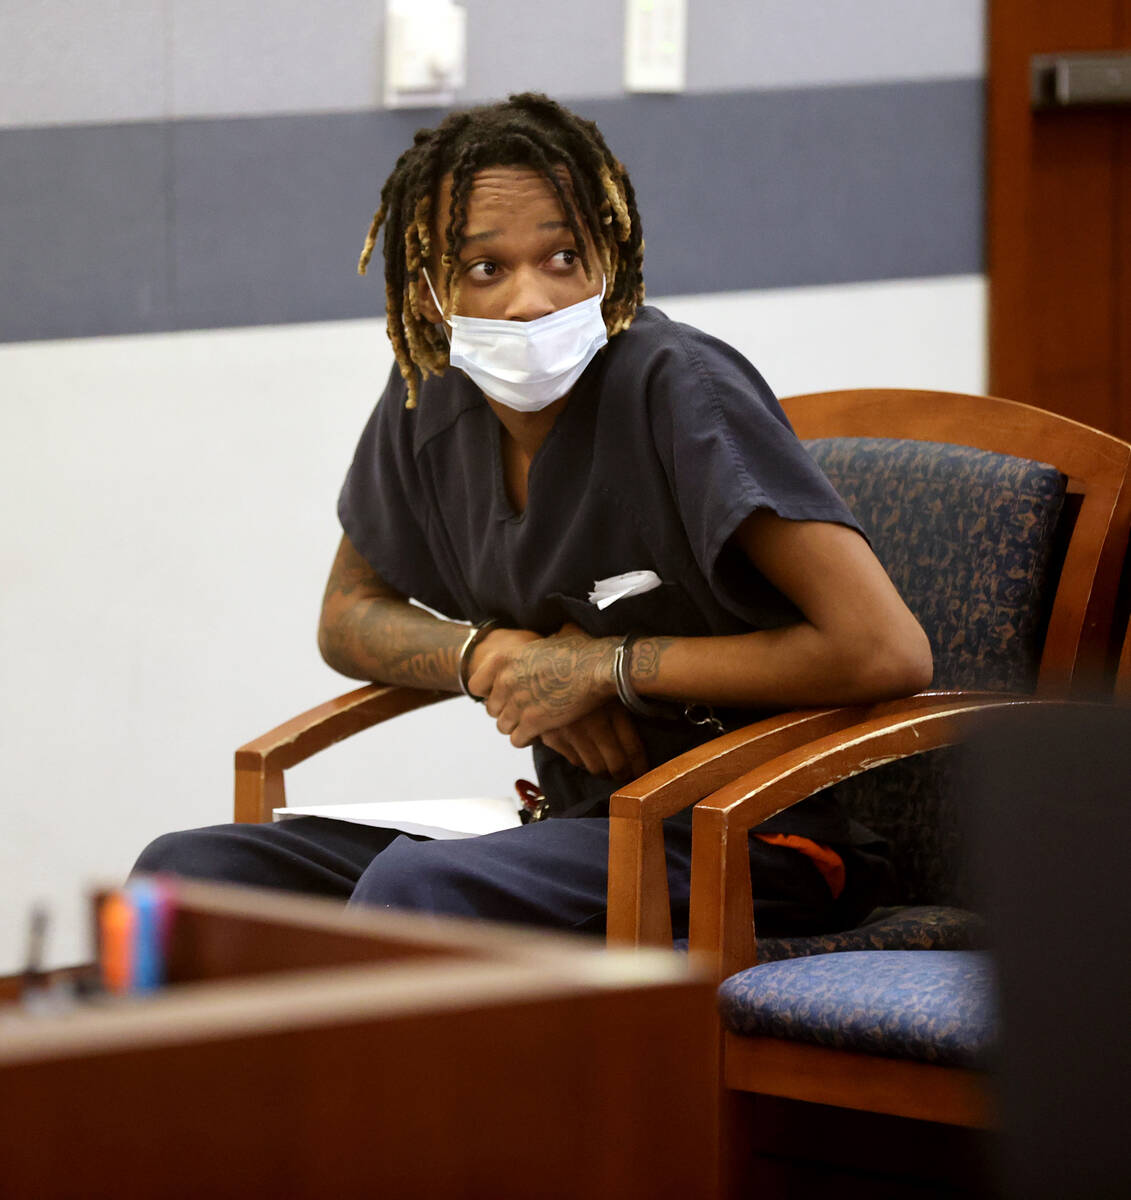 Jesani Carter, 20, appears in court at the Regional Justice Center in downtown Las Vegas Tuesda ...